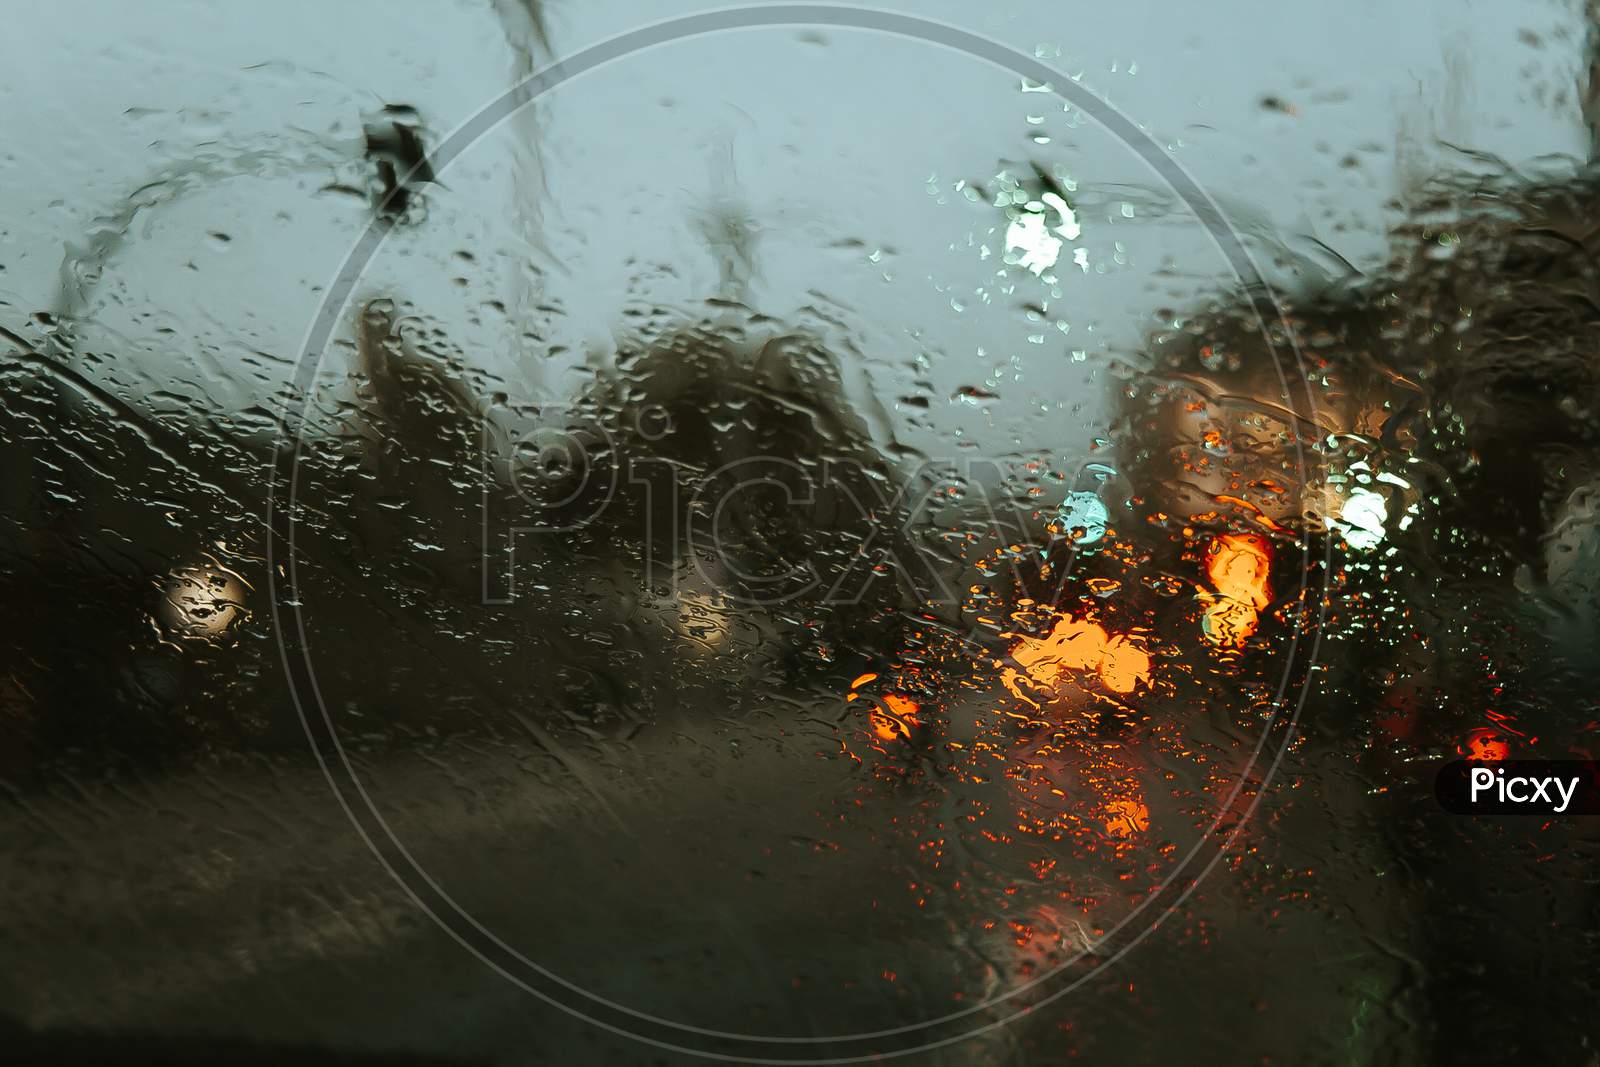 Rain Drops Over The Crystal Of The Car With A Super Texture And Colorful Reflections